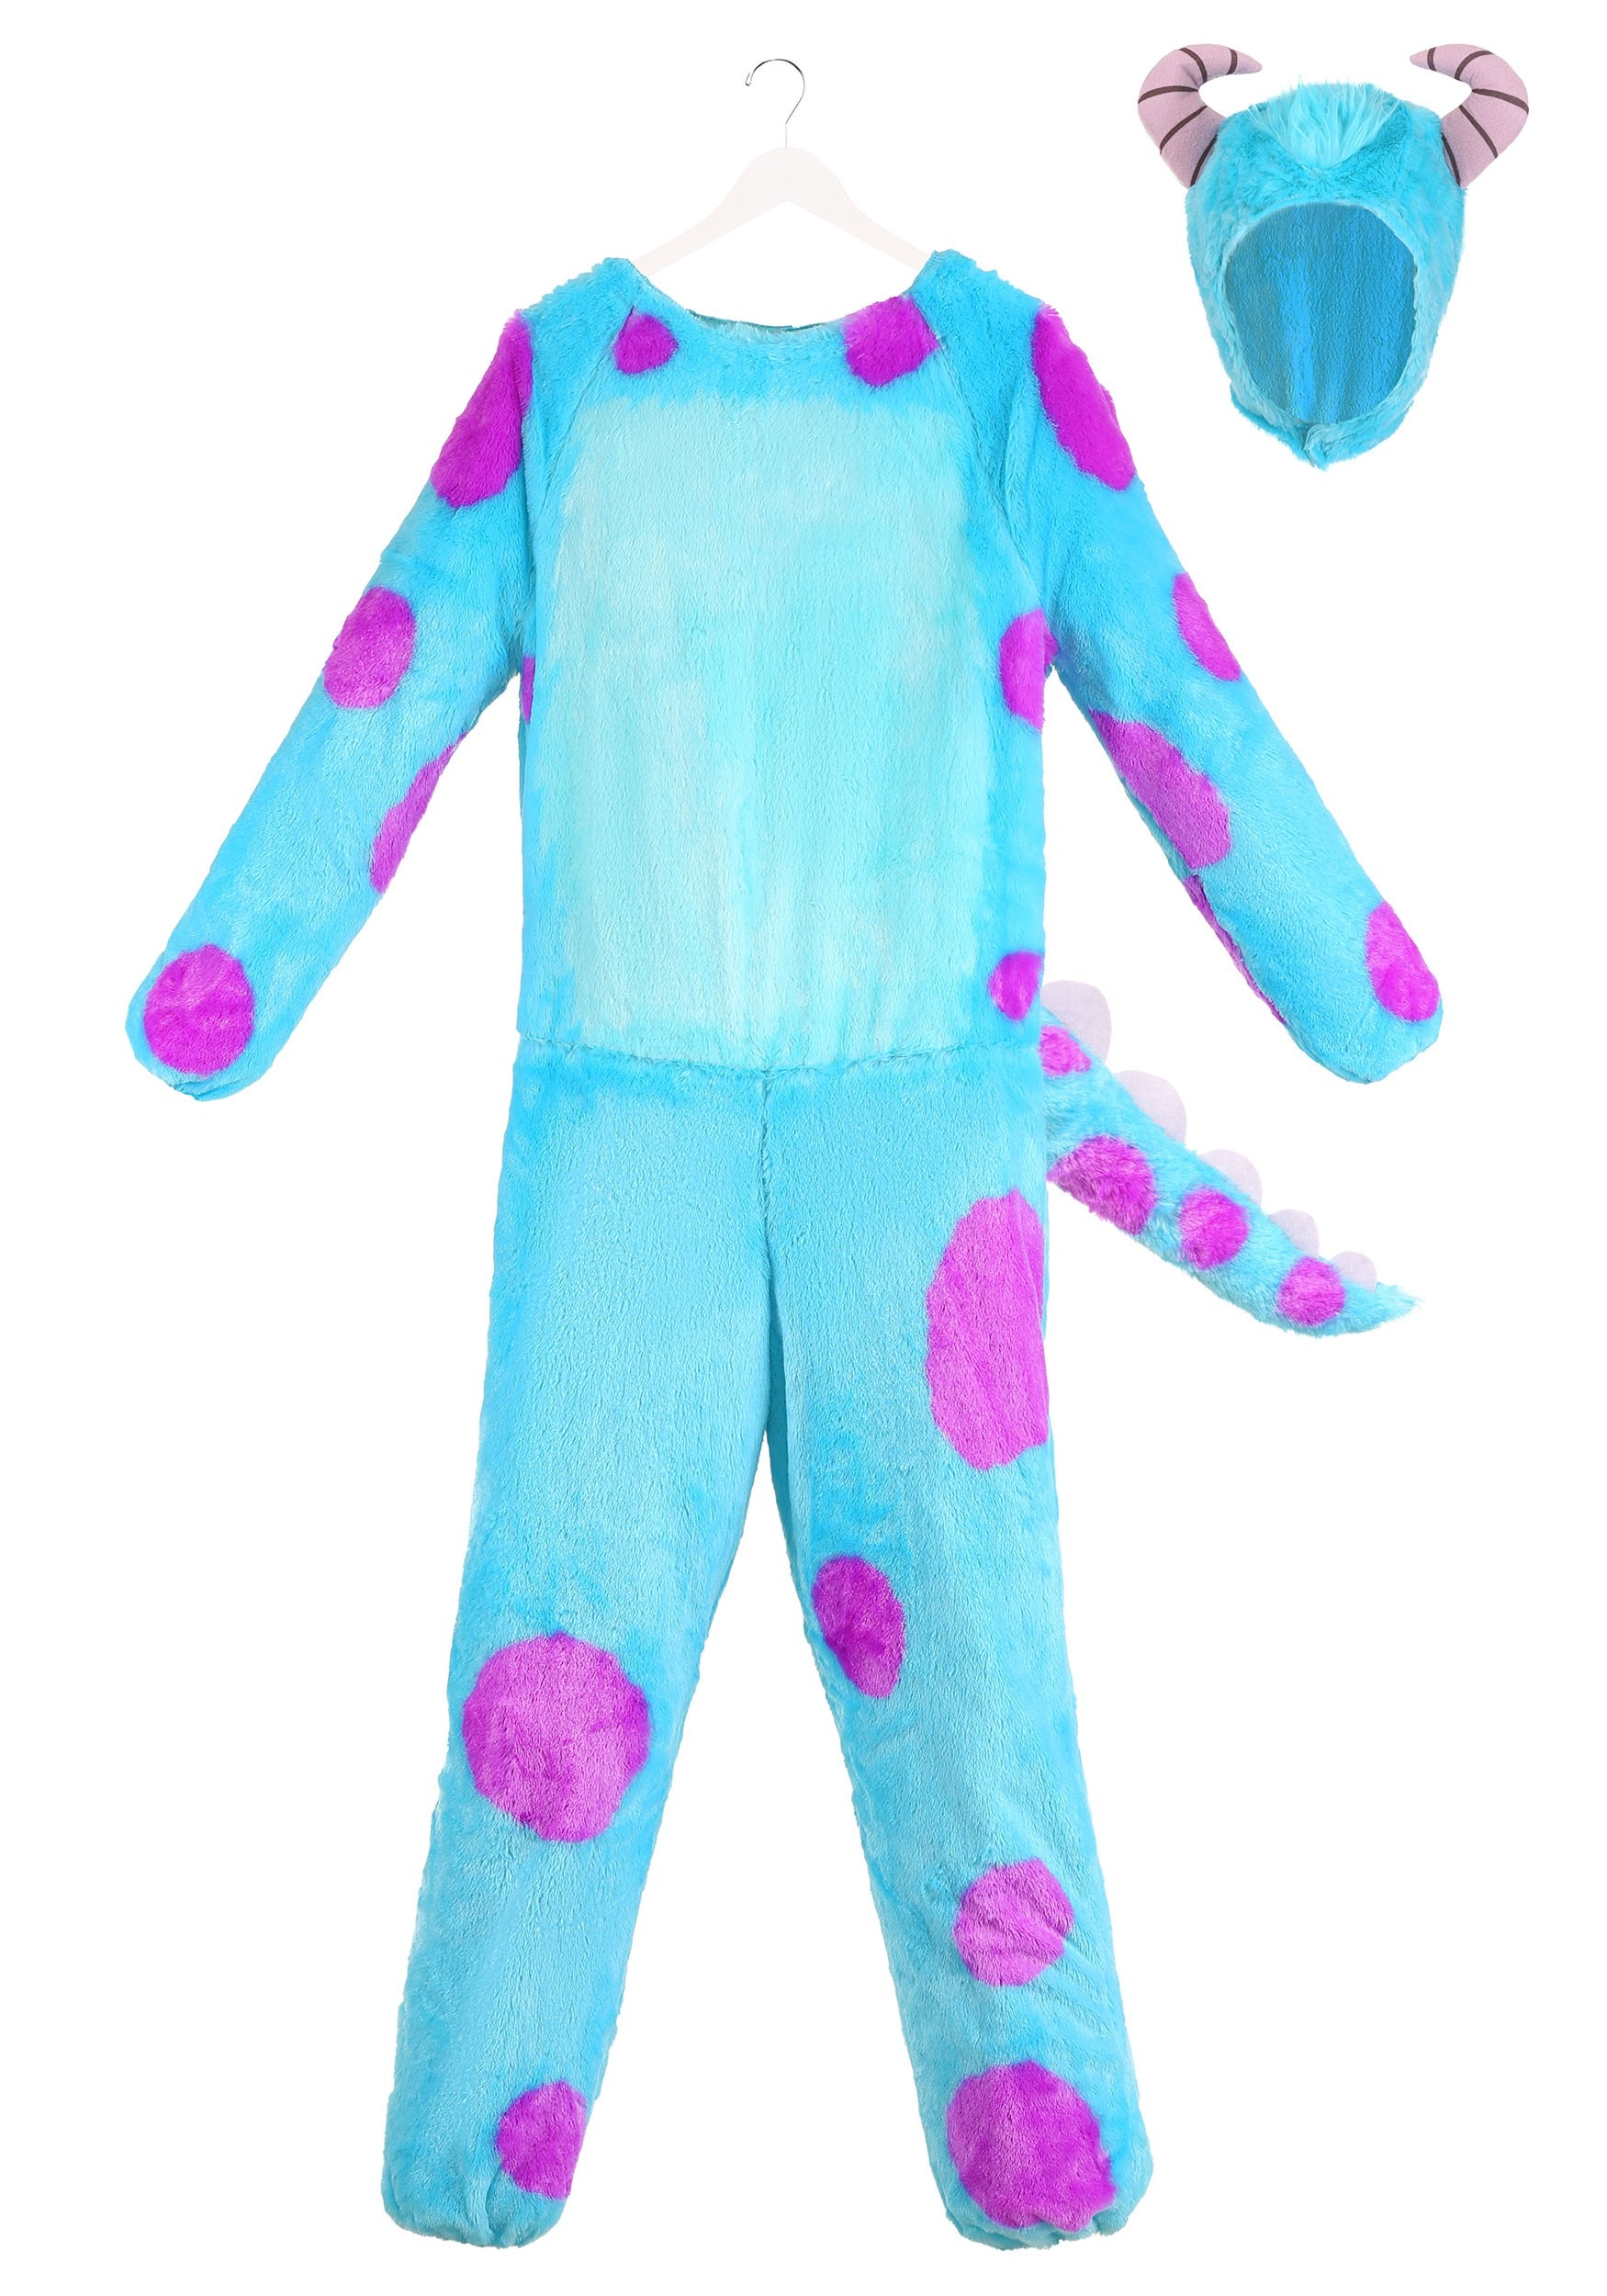 Adult Sulley Costume , Monsters Inc. Adult Costumes